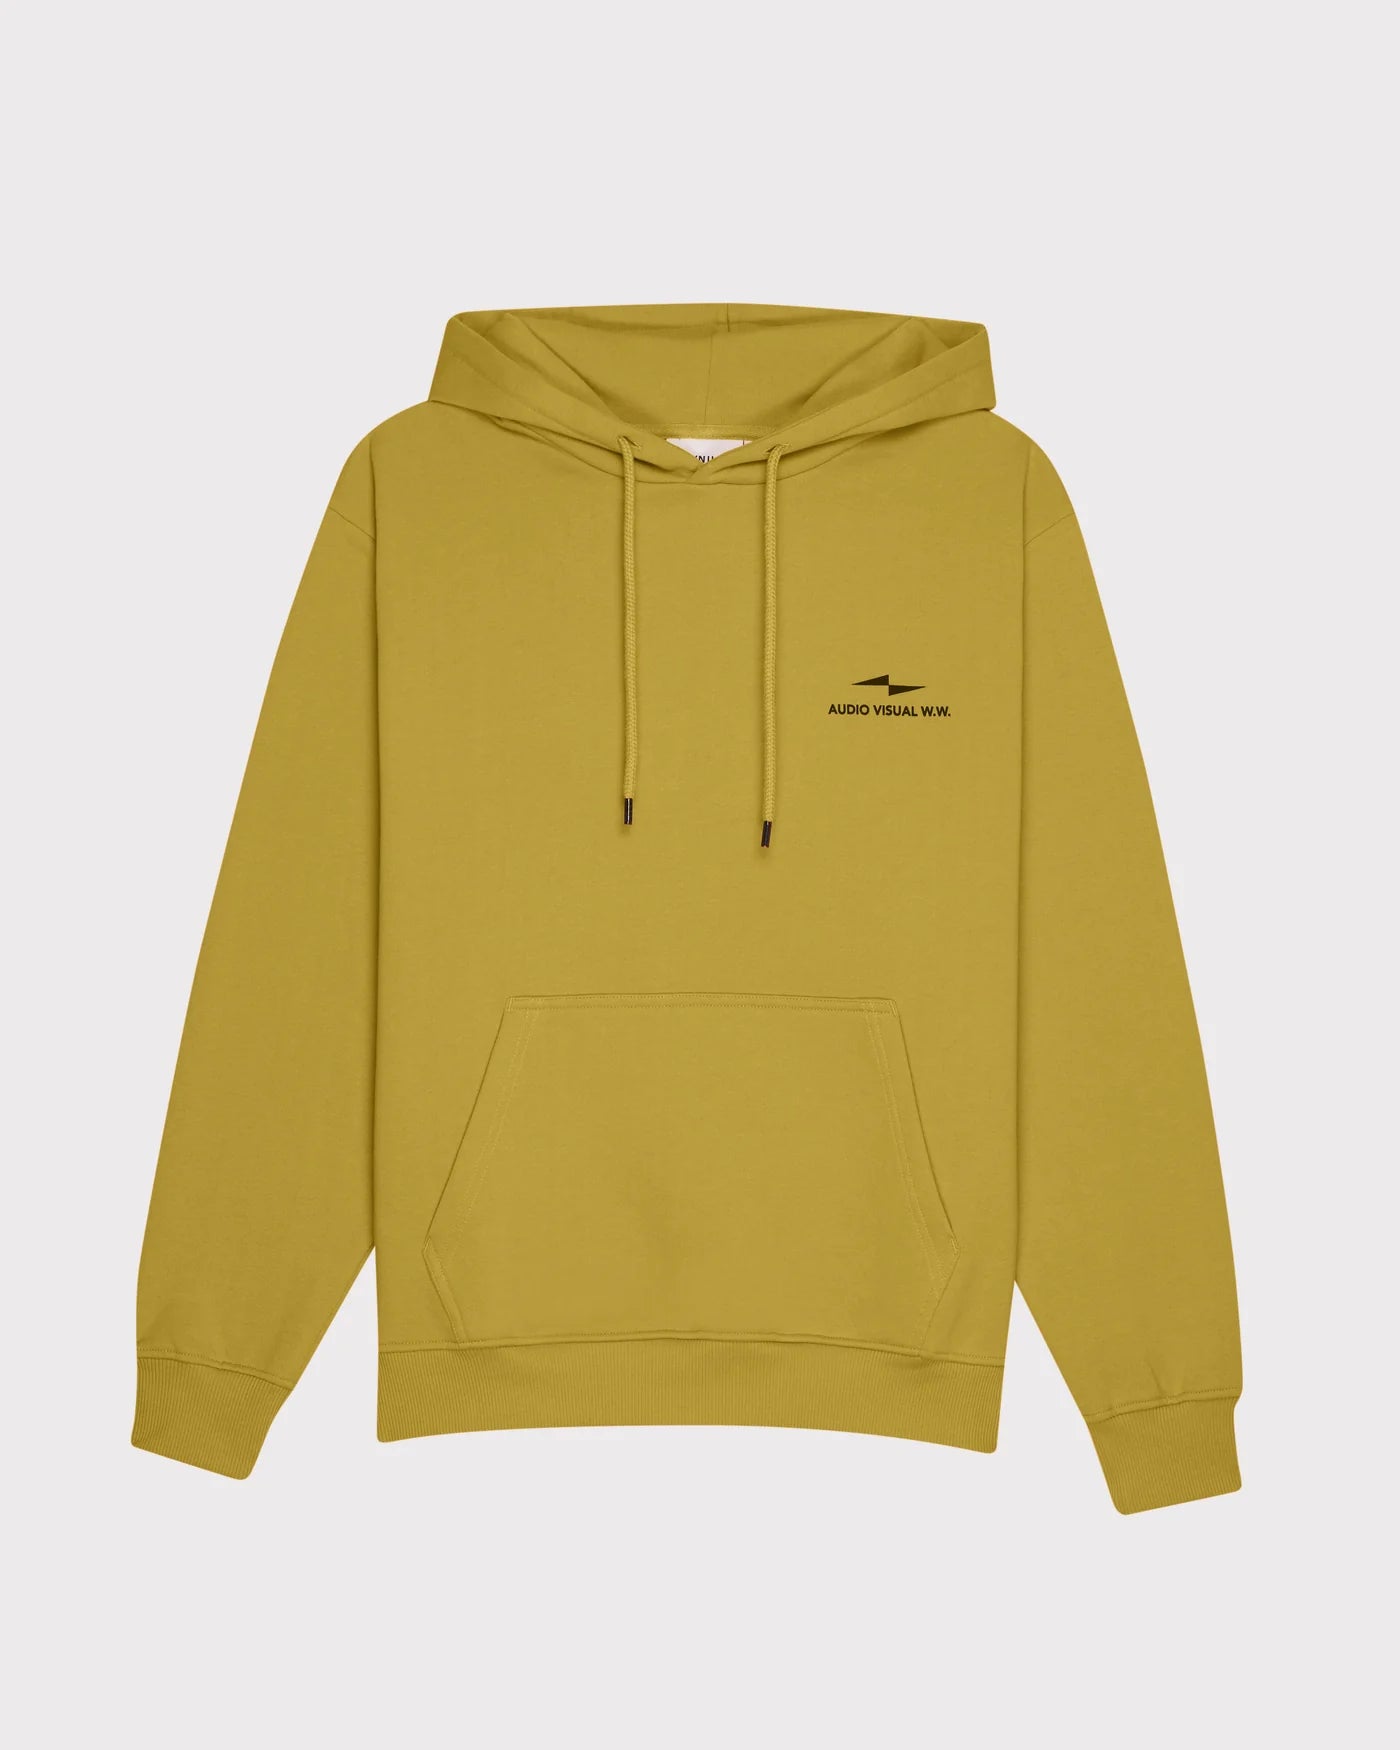 Hoodie Onset Vertical V2.3 - Coton